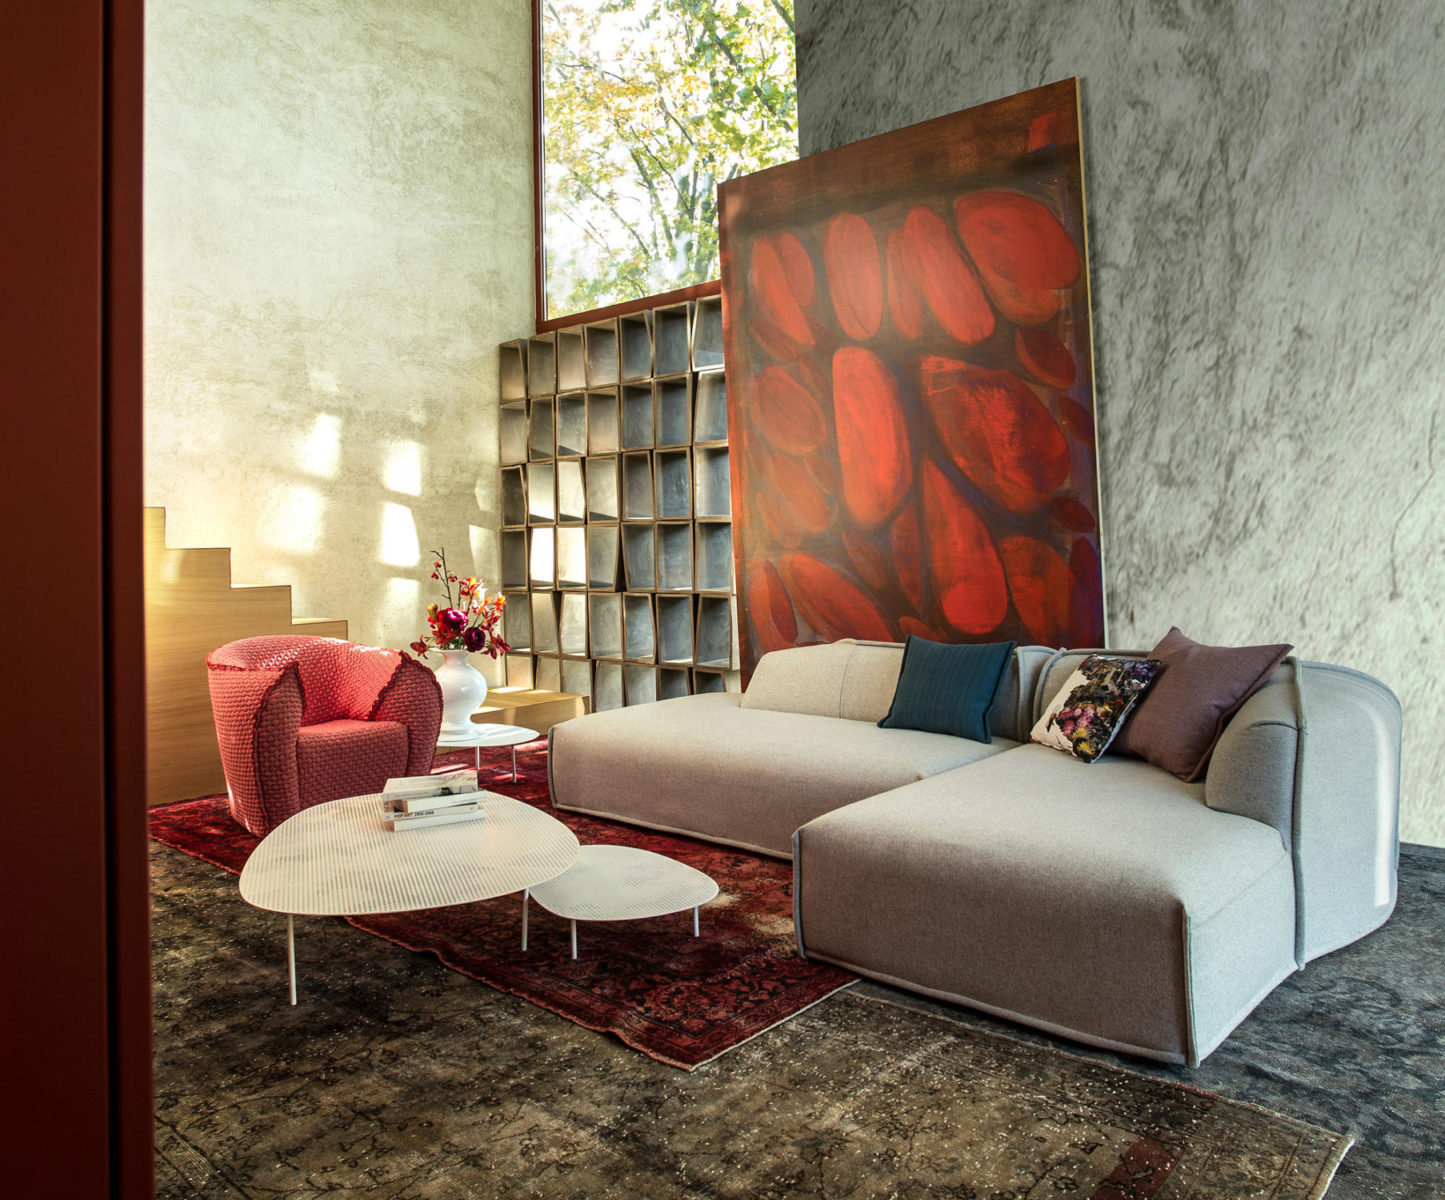 M.A.S.S.A.S. sofas by Patricia Urquiola for Moroso